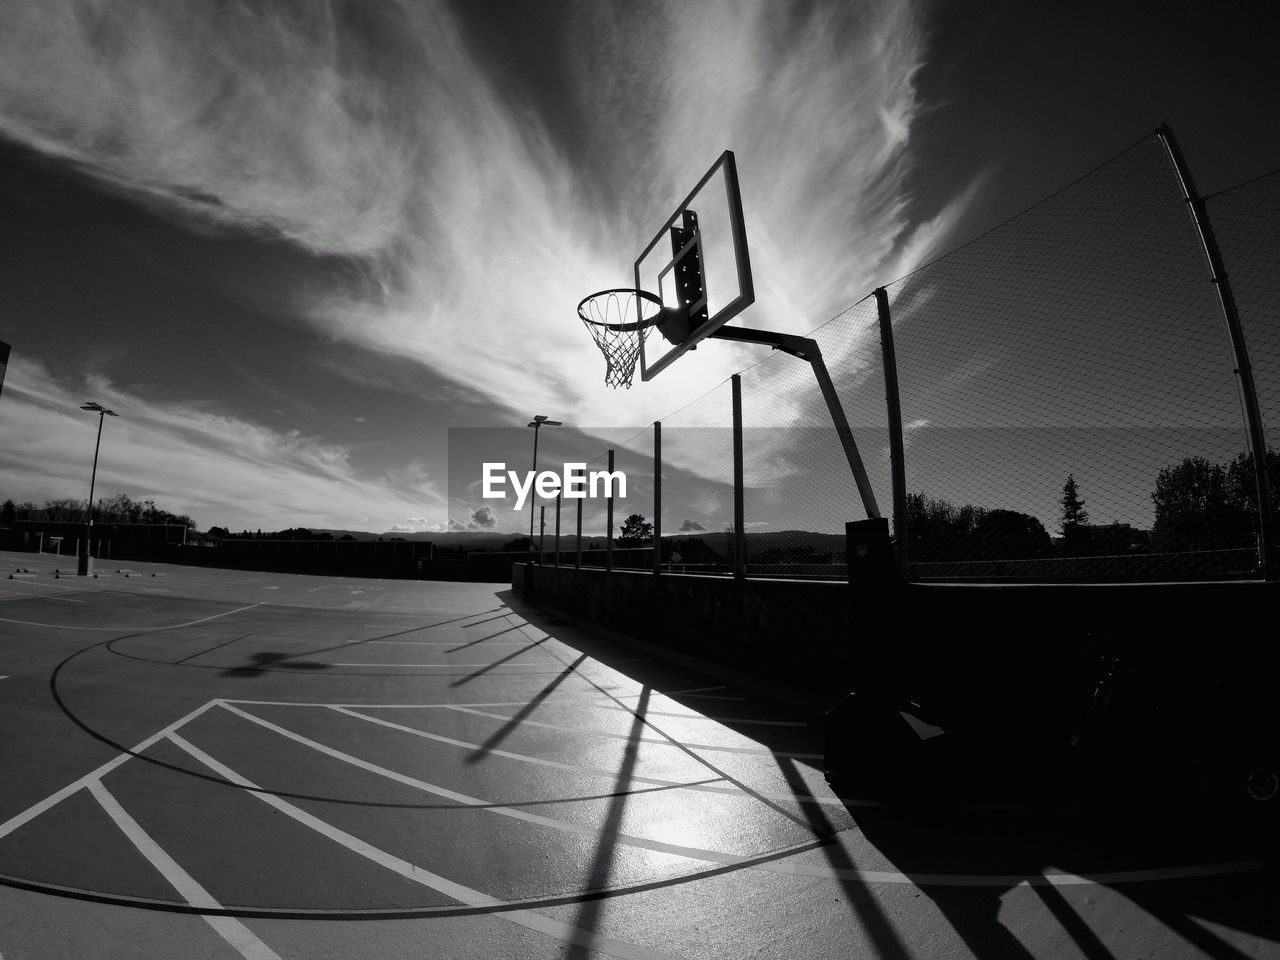 Low angle view of basketball hoop at court against cloudy sky